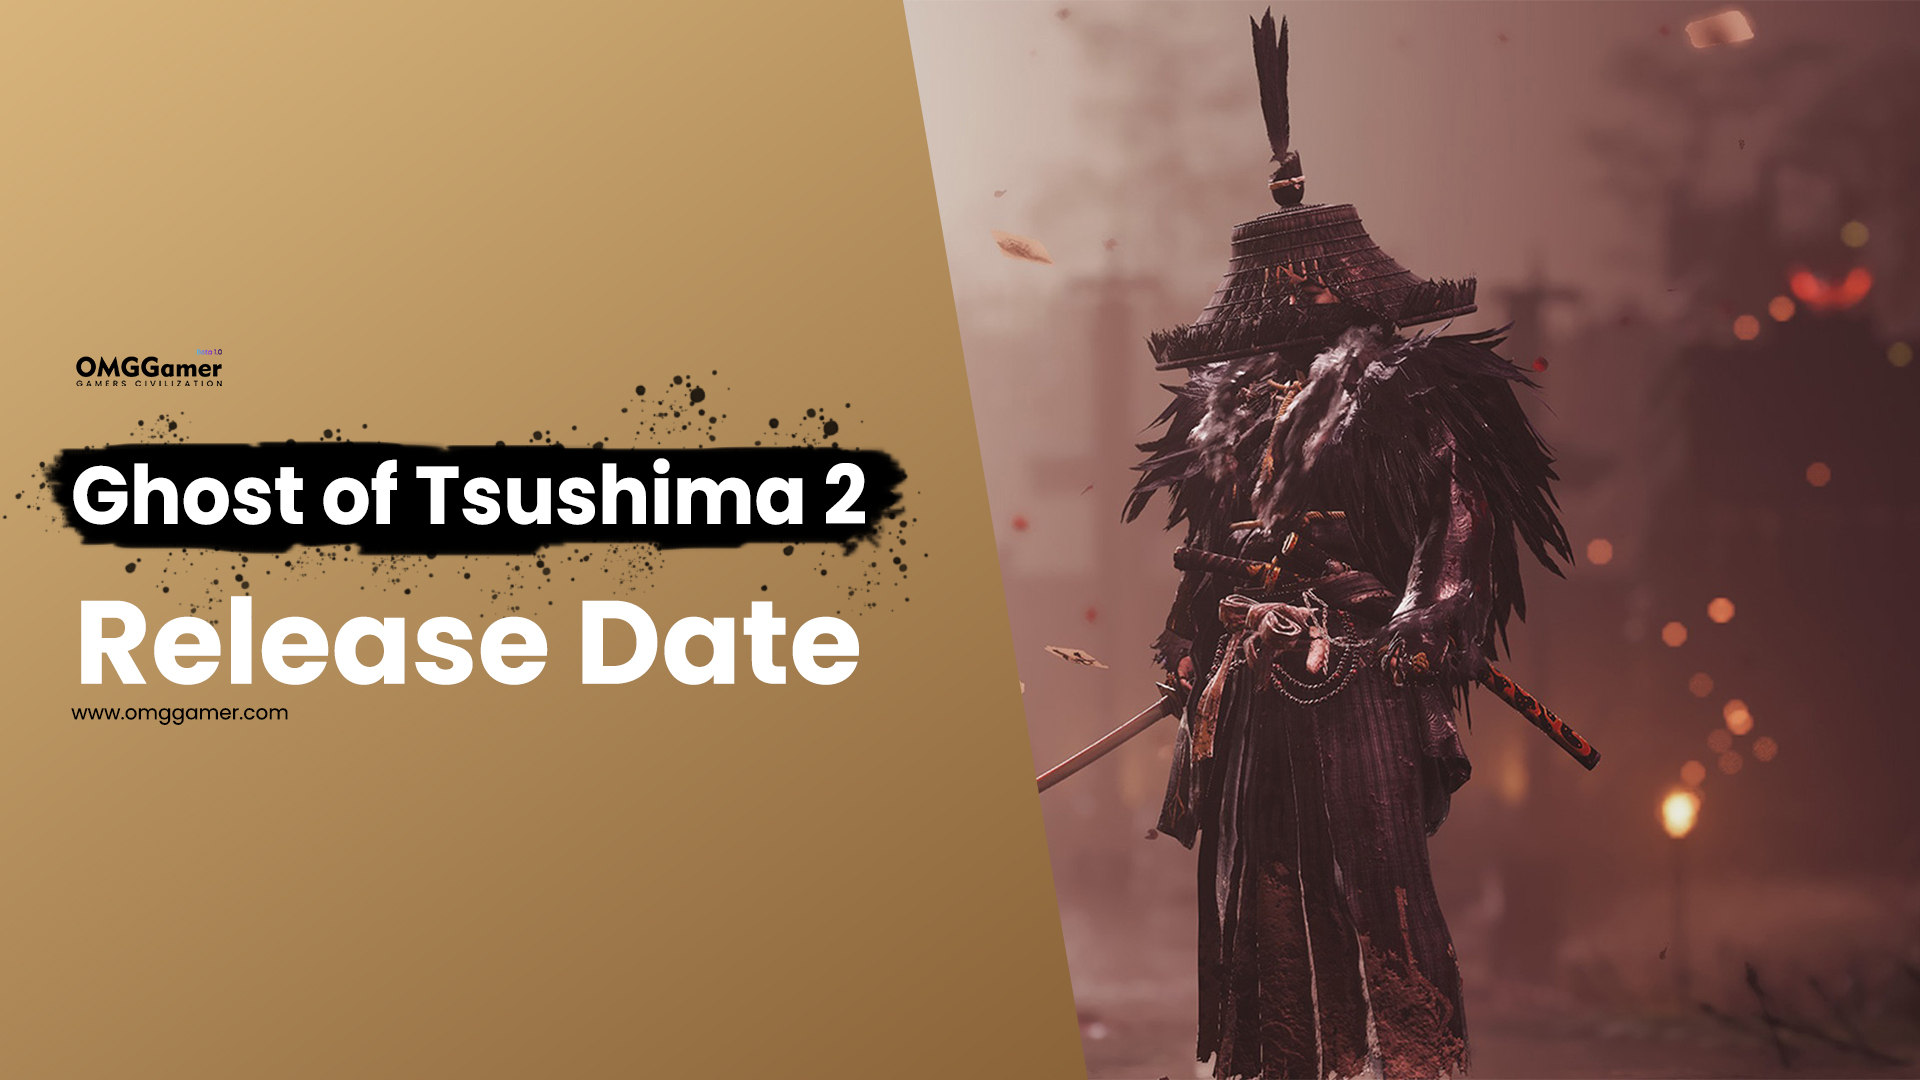 Ghost of Tsushima 2 Release Date